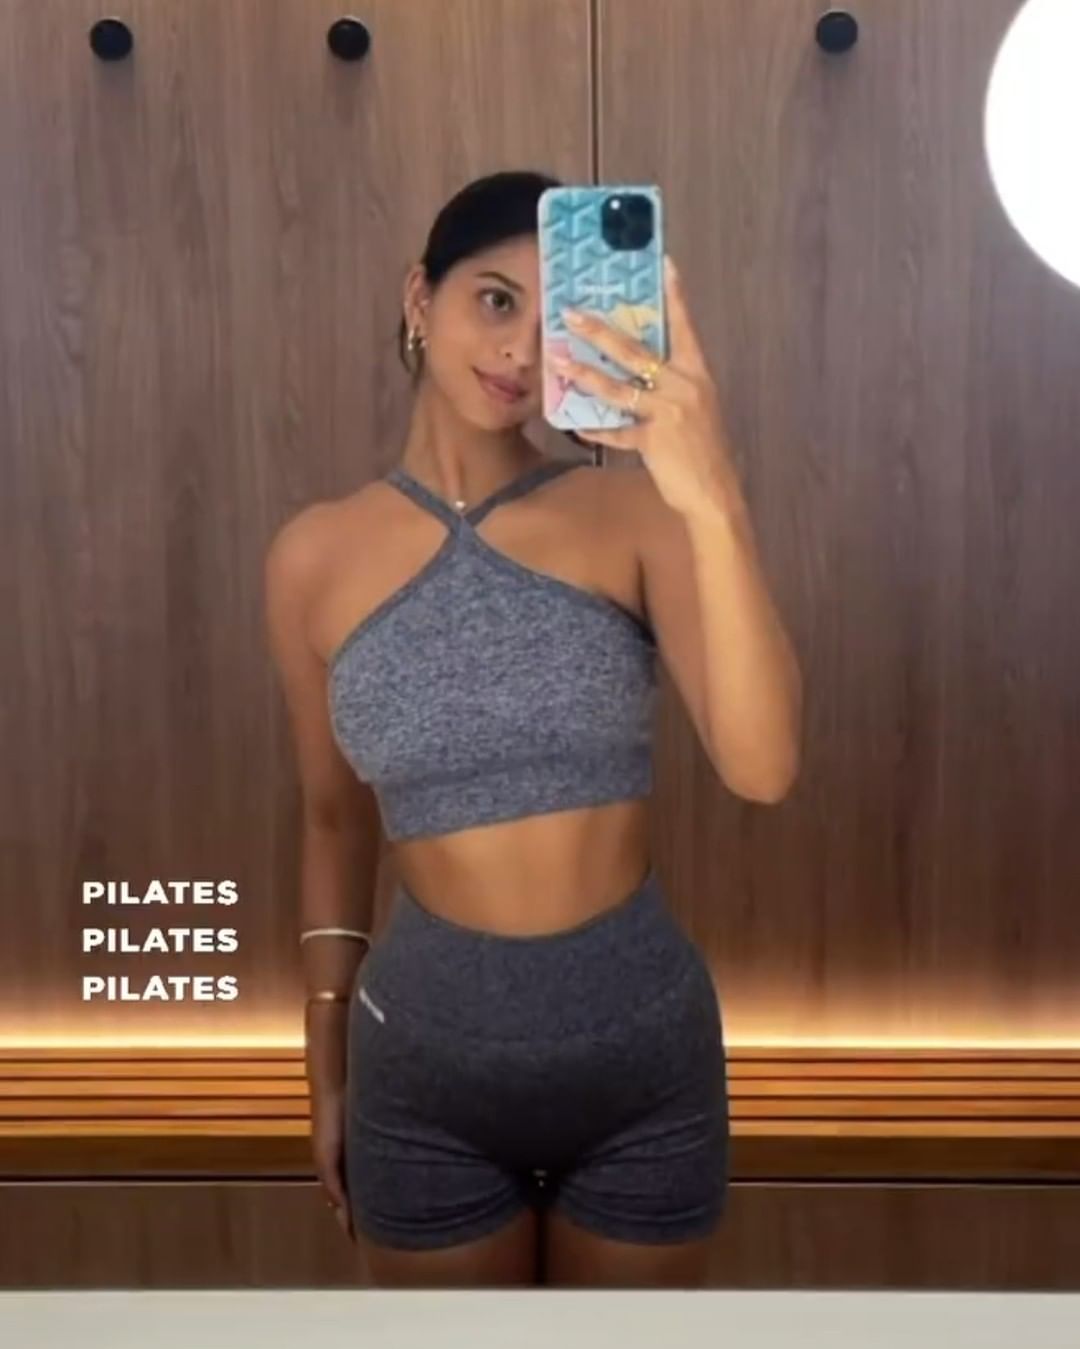  Recently, Suhana Khan showed off her toned body in a mirror selfie post her Pilates session. (Image: Instagram)